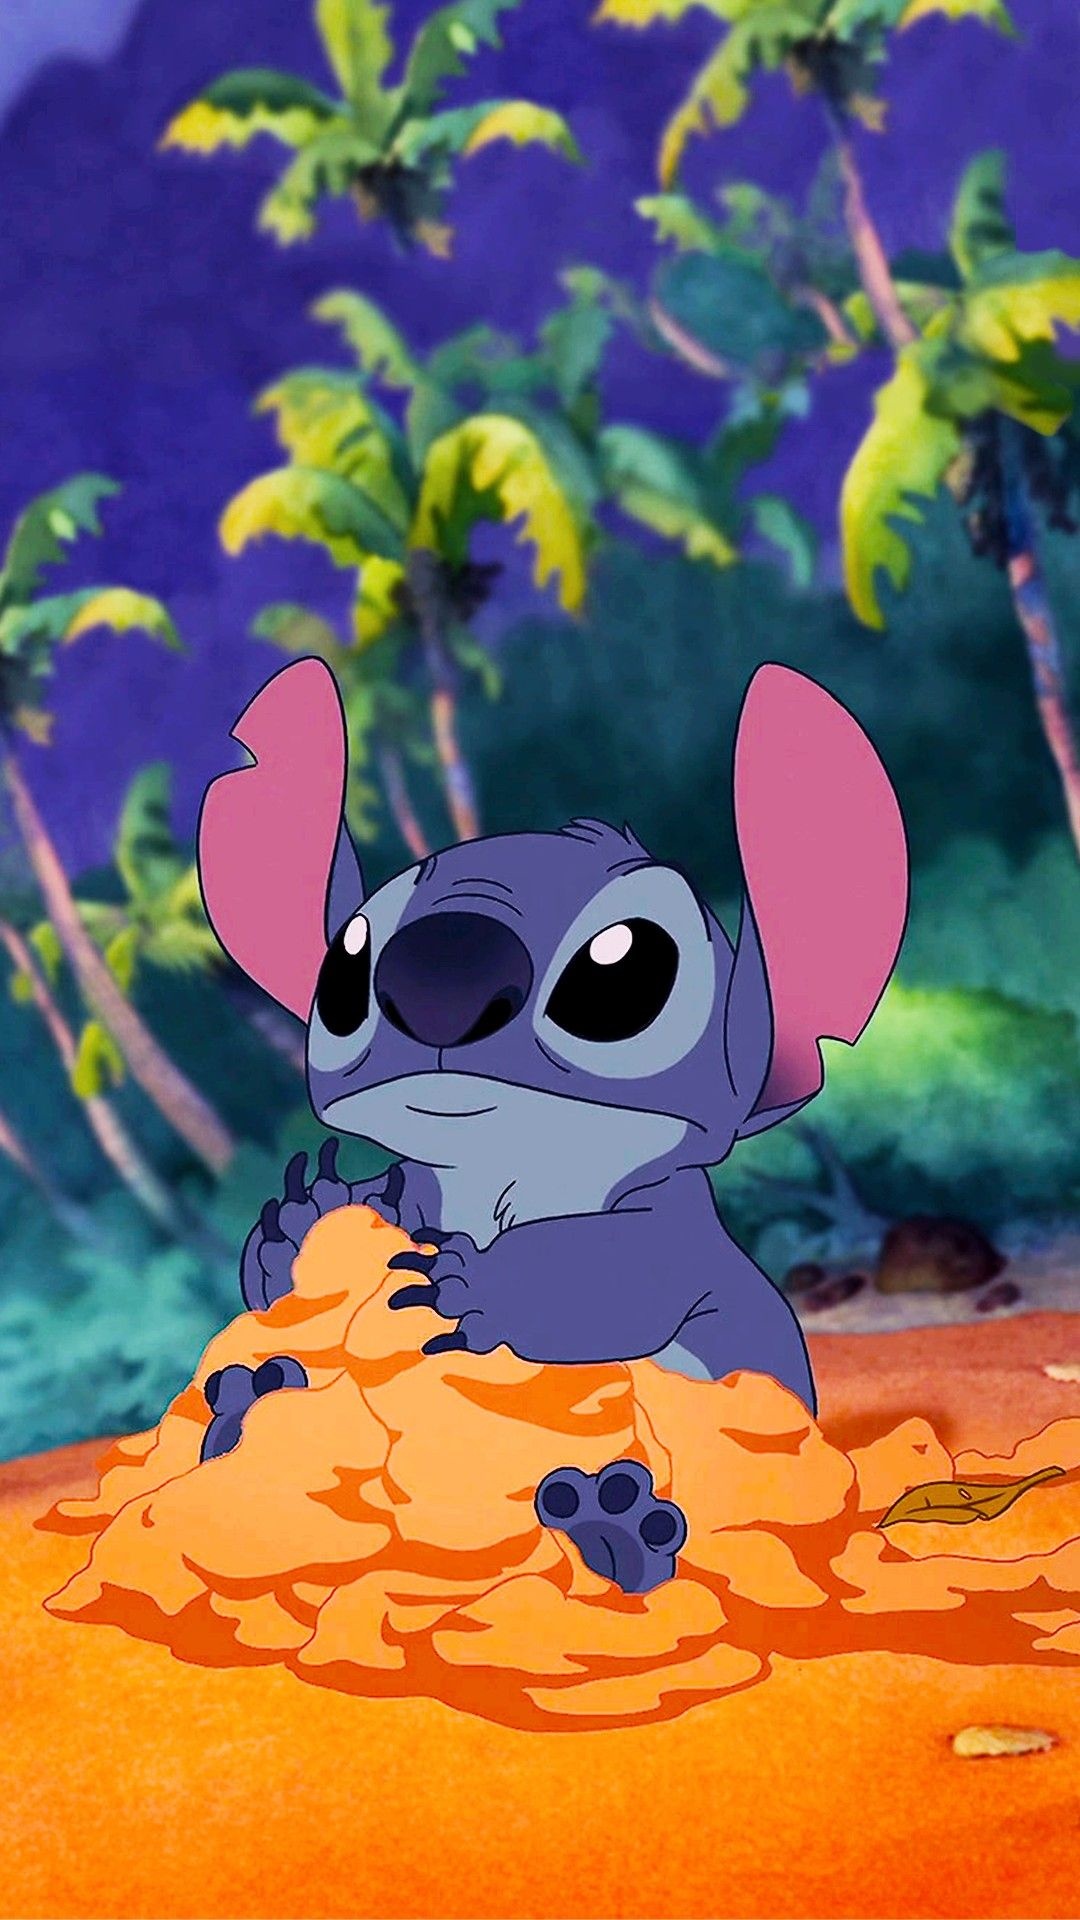 Stitch animation, Blue and cute, Love for Stitch, Desenhos wallpapers, 1080x1920 Full HD Handy